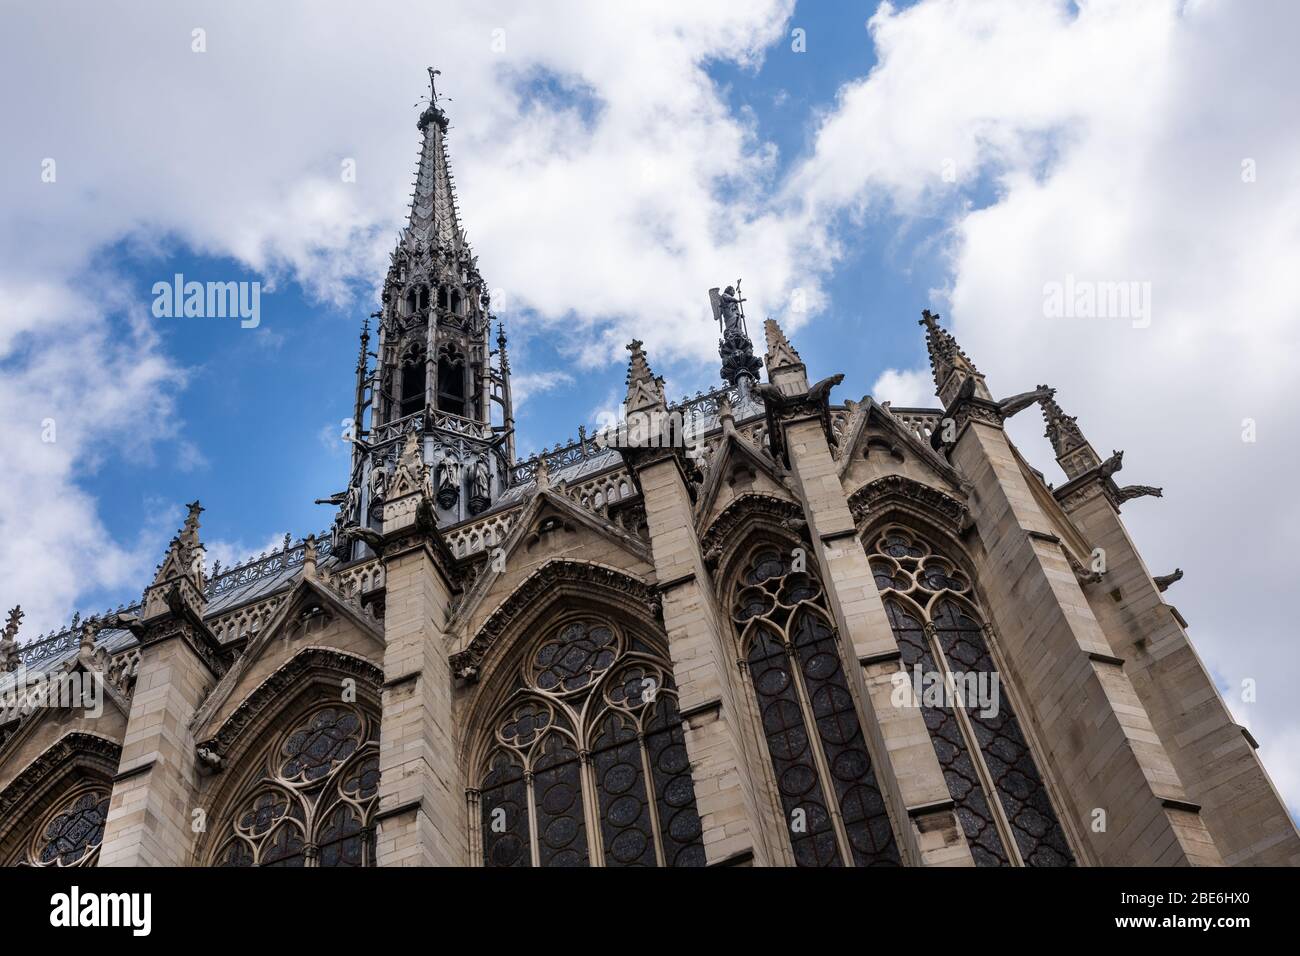 Holy Chapel (The Sainte Chapelle) in Paris, France. Gothic style architecture Stock Photo